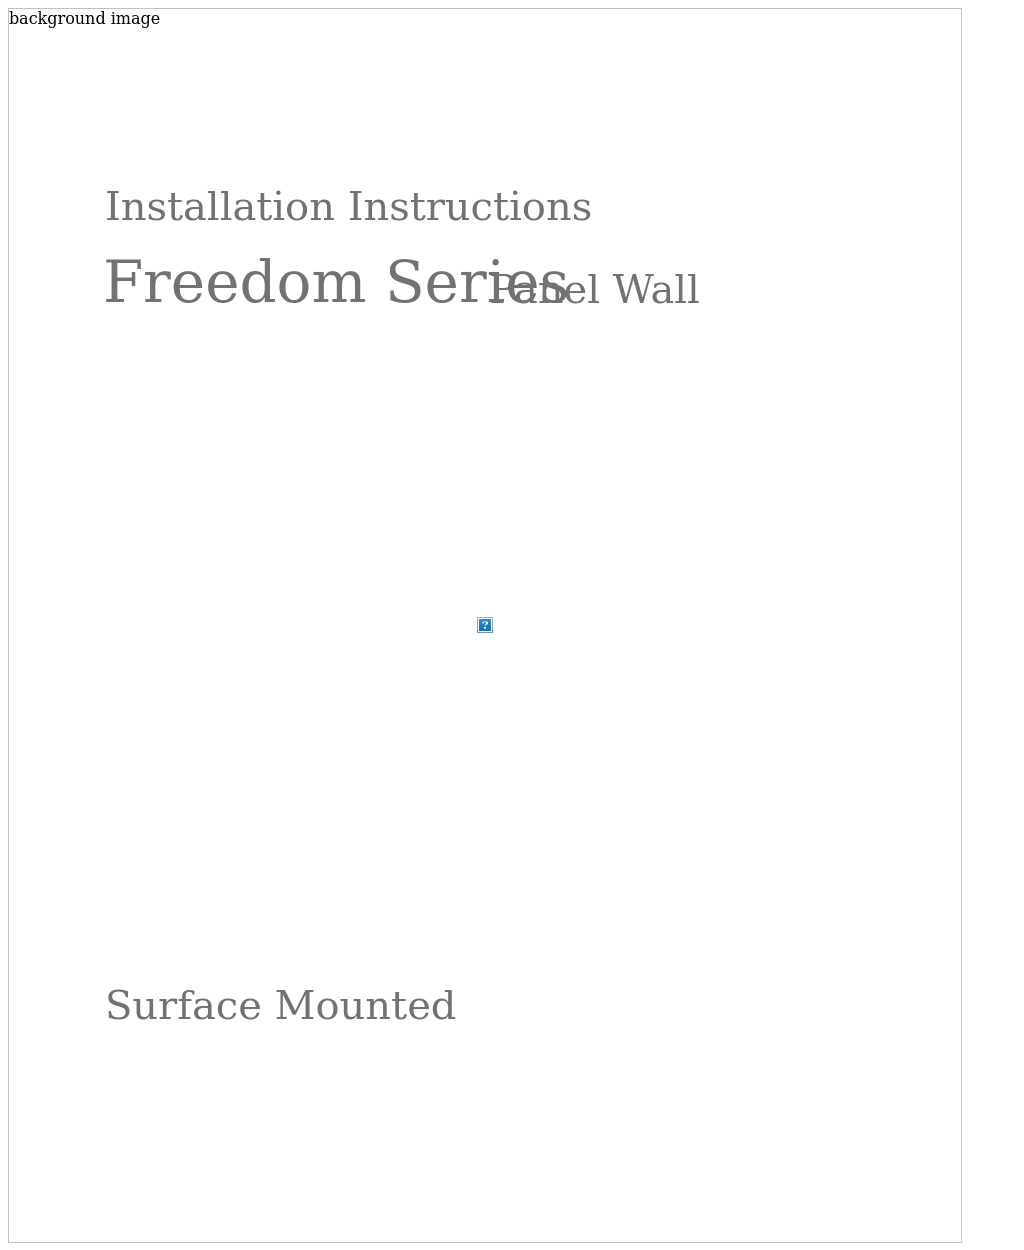 Freedom Series Surface Mounted